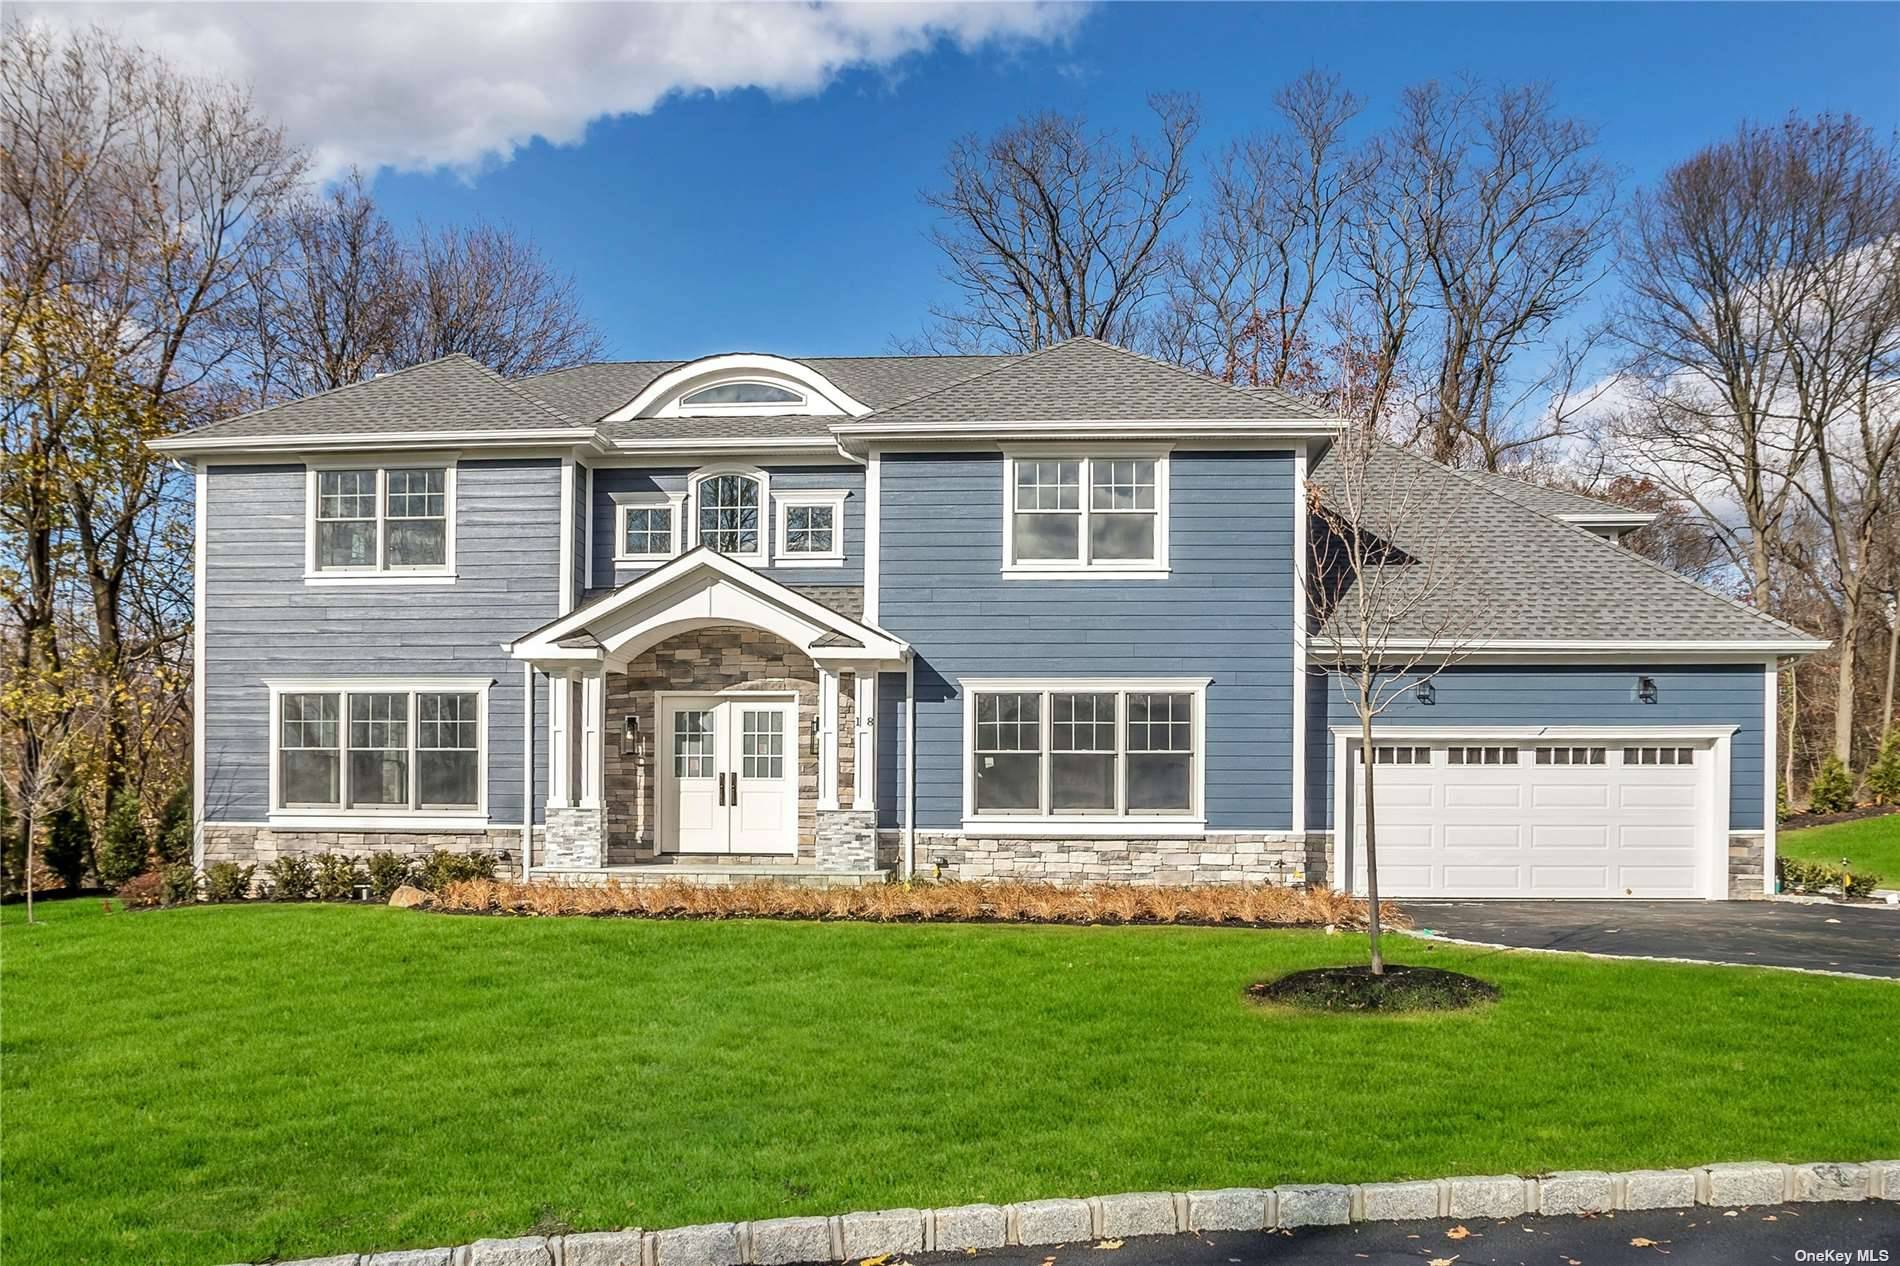 Welcome to Mimosa Estates at Gatehouse Court the land which once held one of Long Island's greatest estates now holds this spectacular 1 of 4 brand new custom built homes ...